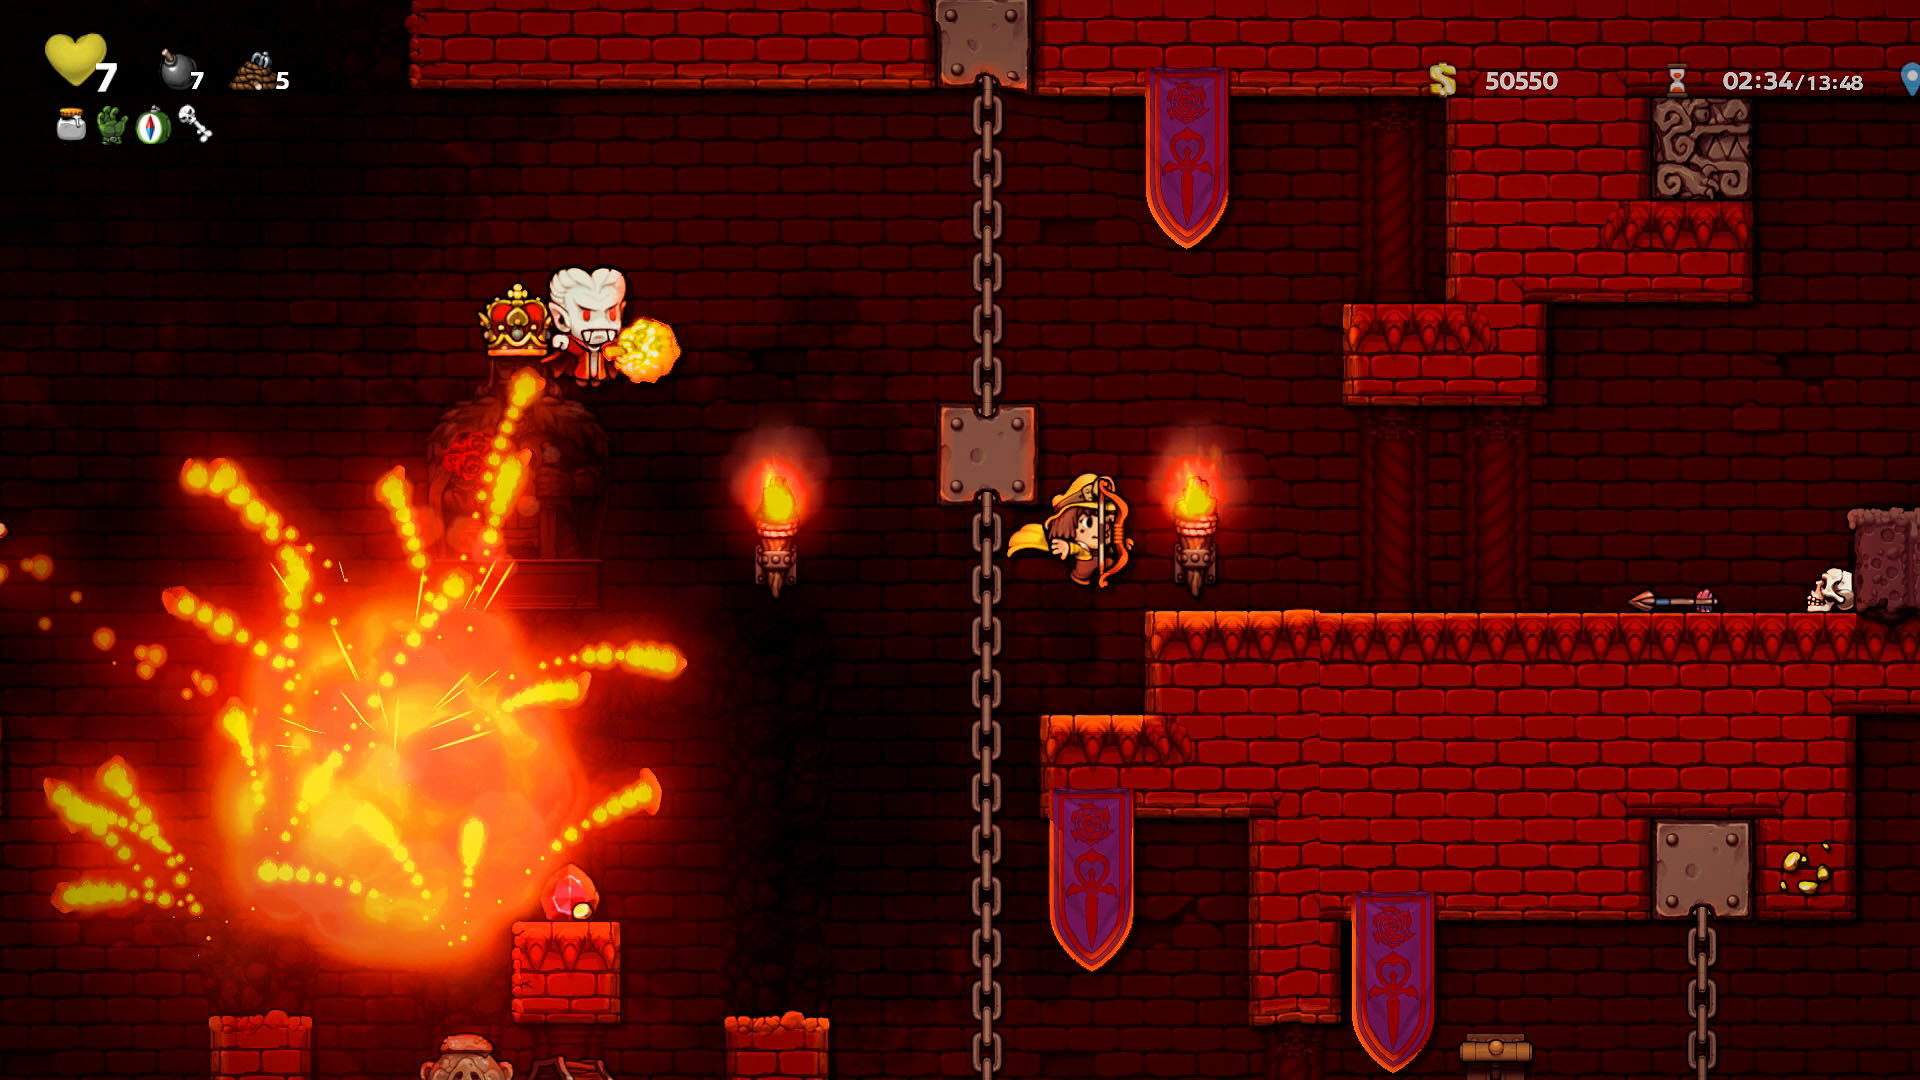 The player, chased by a vampire that is about to explode by a sticky bomb.